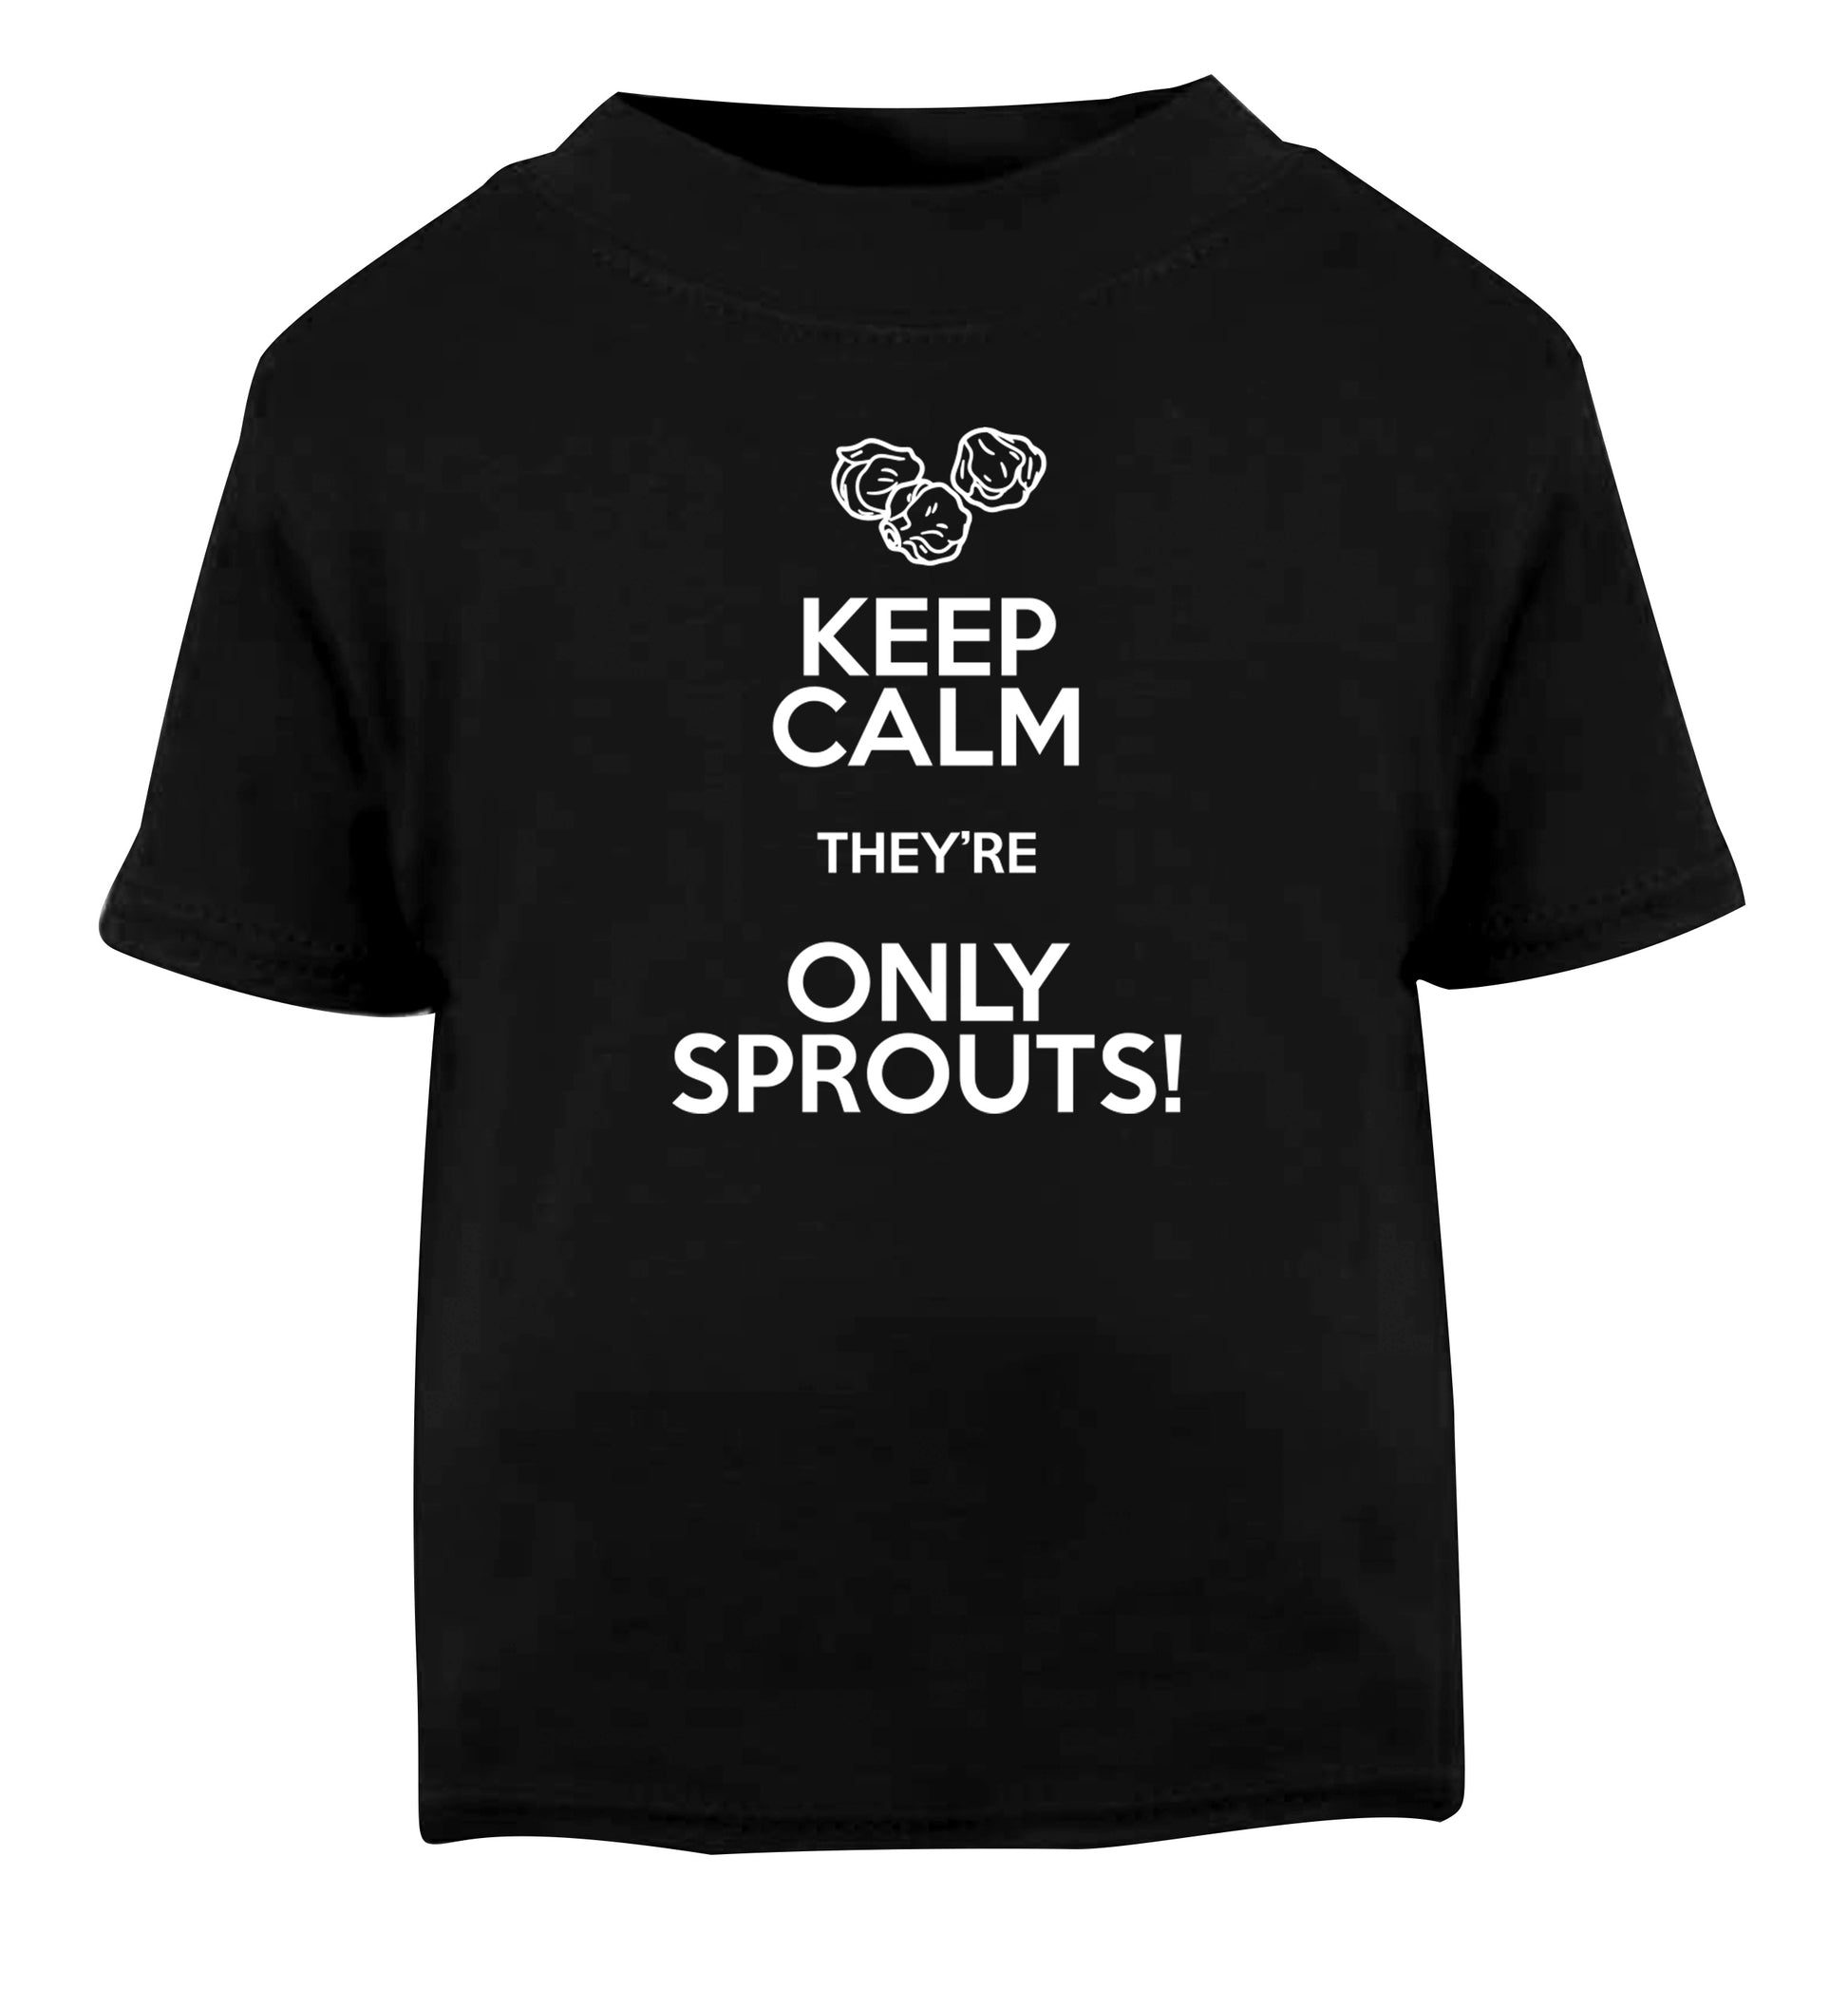 Keep calm they're only sprouts Black Baby Toddler Tshirt 2 years